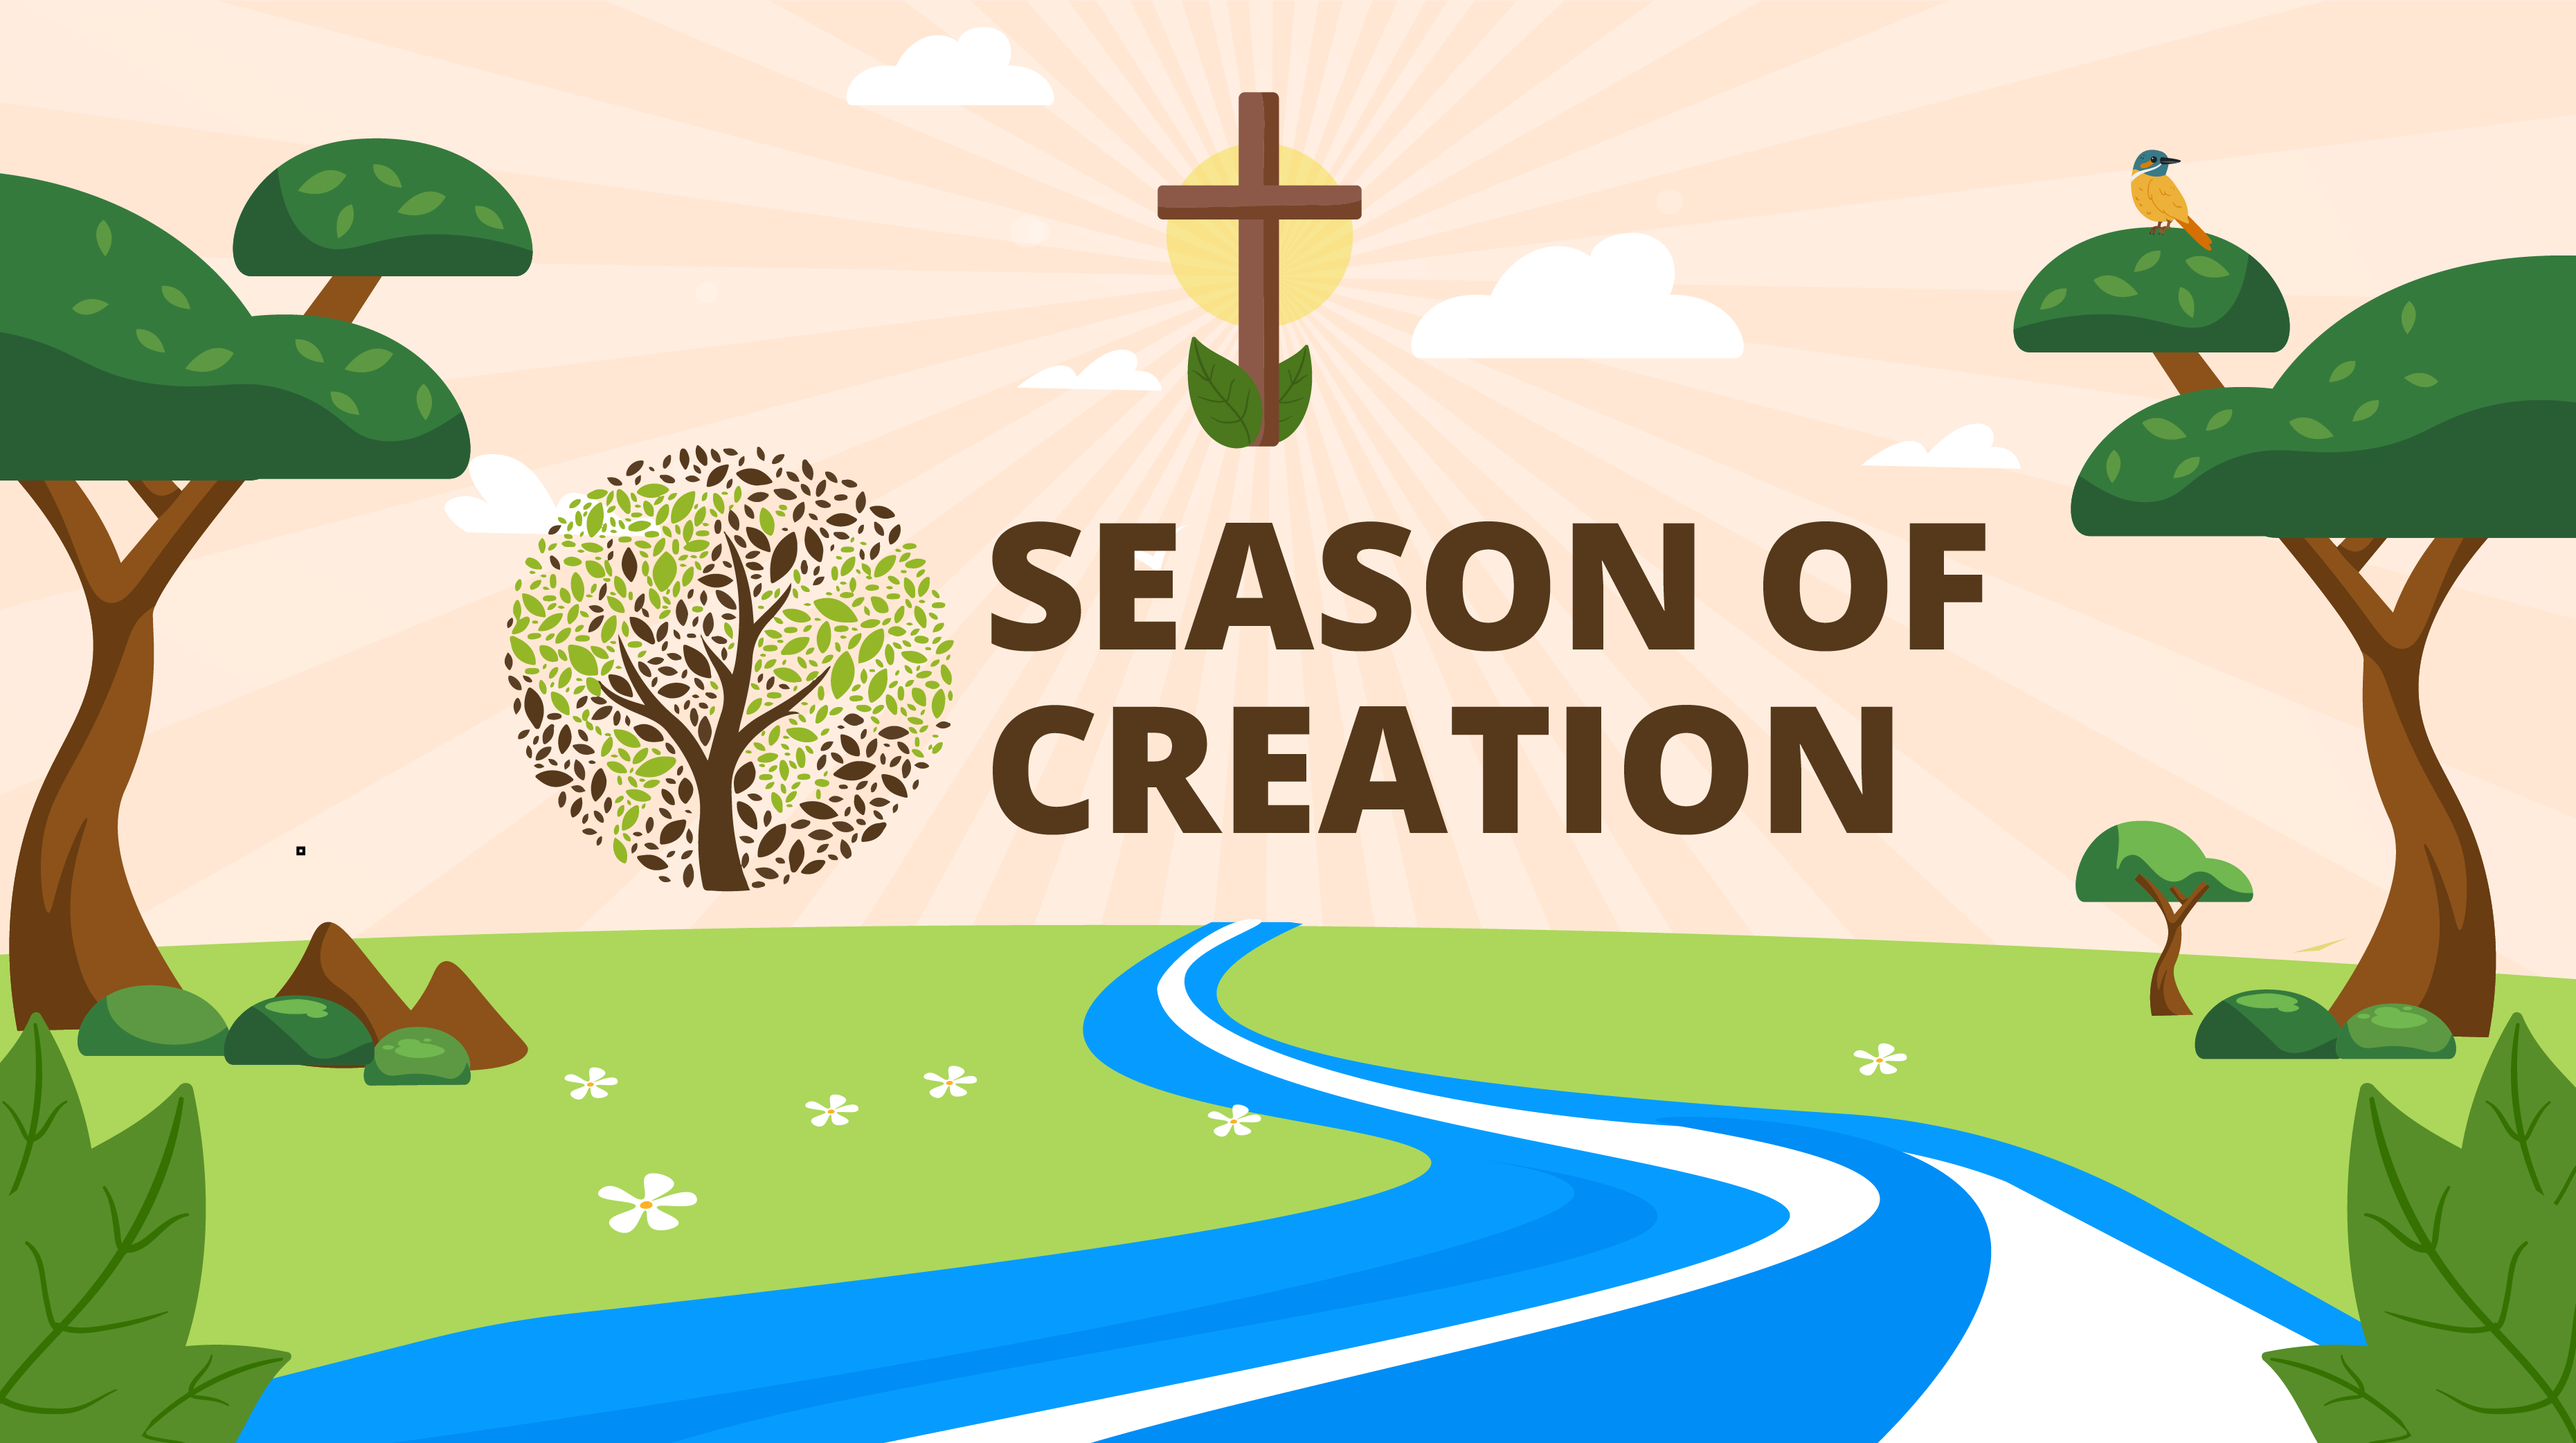 About - Season of Creation